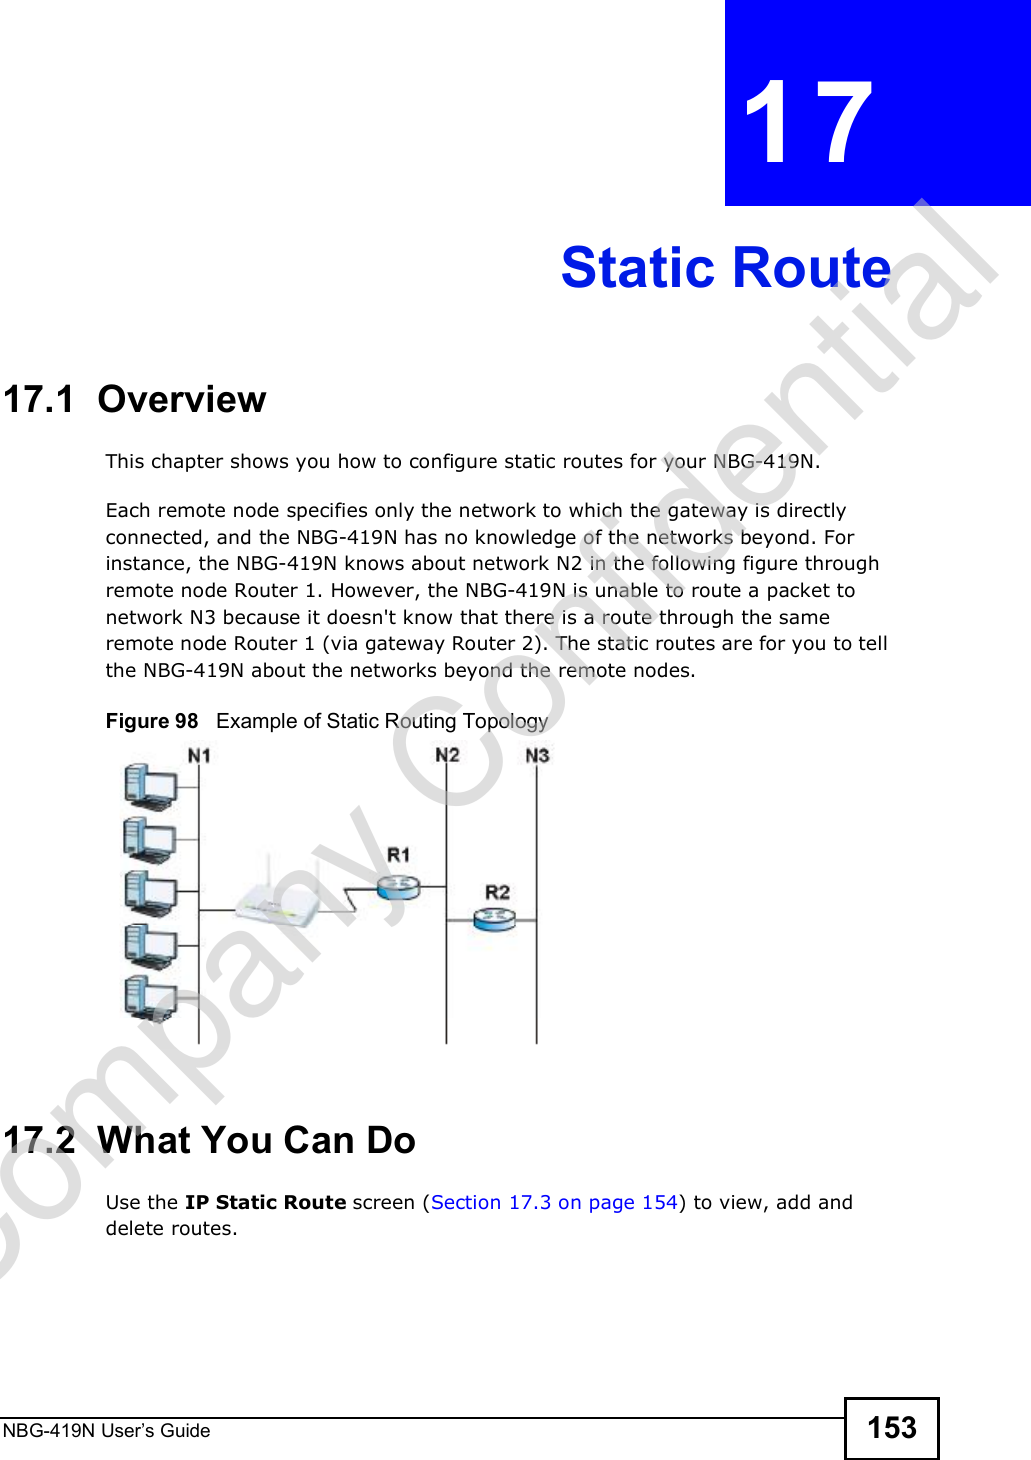 NBG-419N User s Guide 153CHAPTER  17 Static Route17.1  Overview   This chapter shows you how to configure static routes for your NBG-419N.Each remote node specifies only the network to which the gateway is directly connected, and the NBG-419N has no knowledge of the networks beyond. For instance, the NBG-419N knows about network N2 in the following figure through remote node Router 1. However, the NBG-419N is unable to route a packet to network N3 because it doesn&apos;t know that there is a route through the same remote node Router 1 (via gateway Router 2). The static routes are for you to tell the NBG-419N about the networks beyond the remote nodes.Figure 98   Example of Static Routing Topology17.2  What You Can DoUse the IP Static Route screen (Section 17.3 on page 154) to view, add and delete routes.Company Confidential